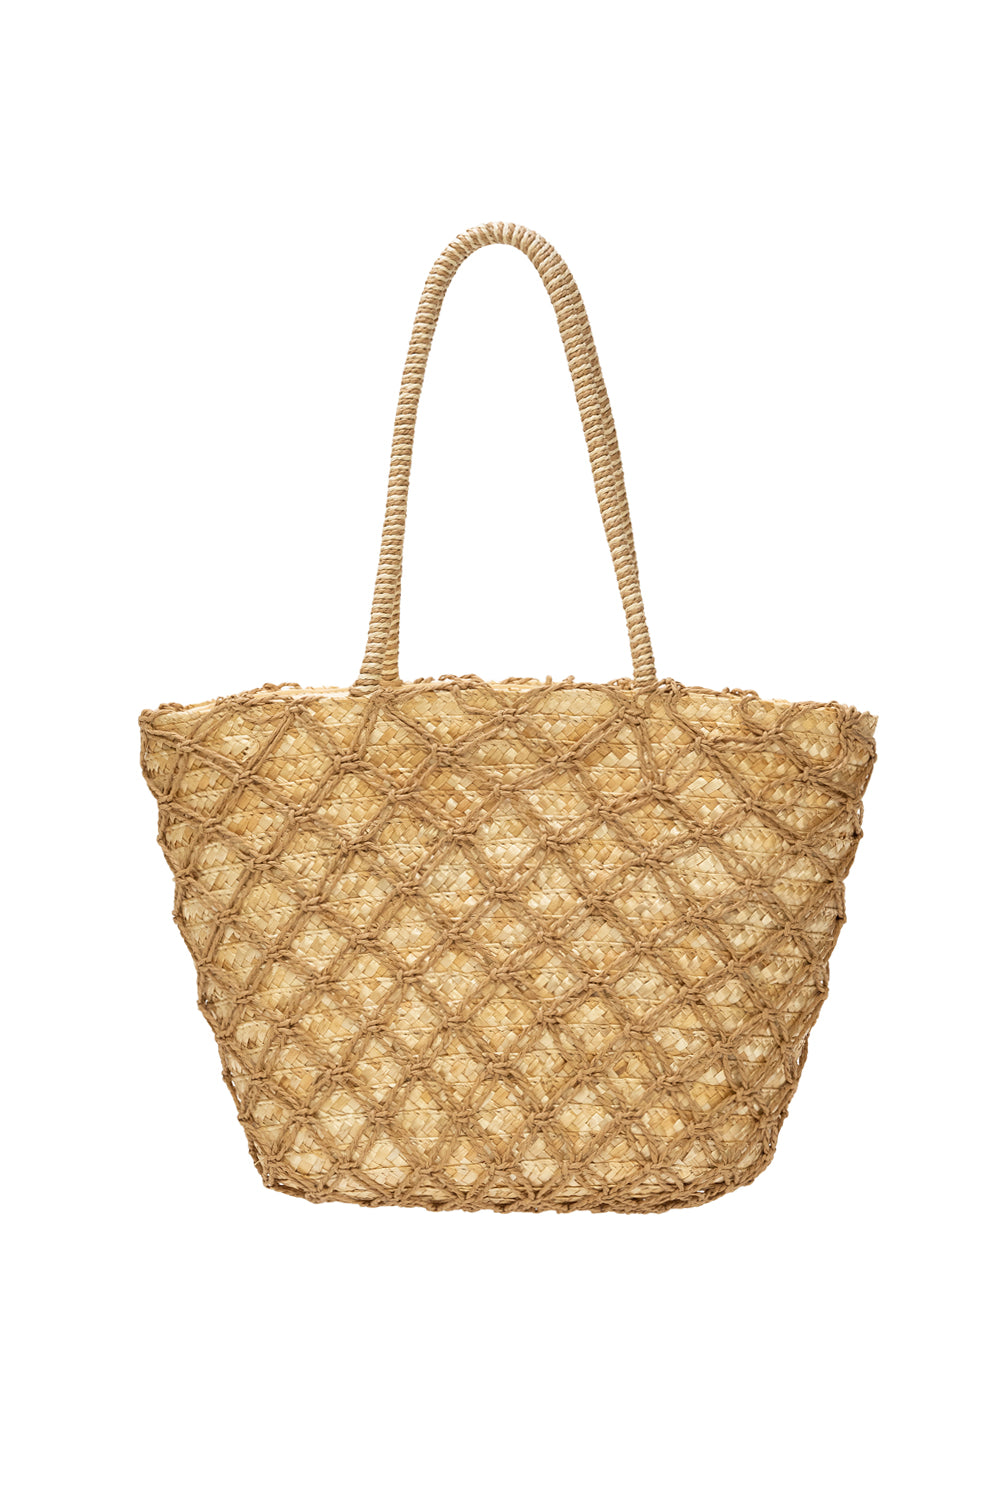 My Accessories London Straw Beach Bag with Woven Link Straw Pattern in Natural | Beach | Holiday | Bag | Shopper | Tote | Accessory | Neutral |